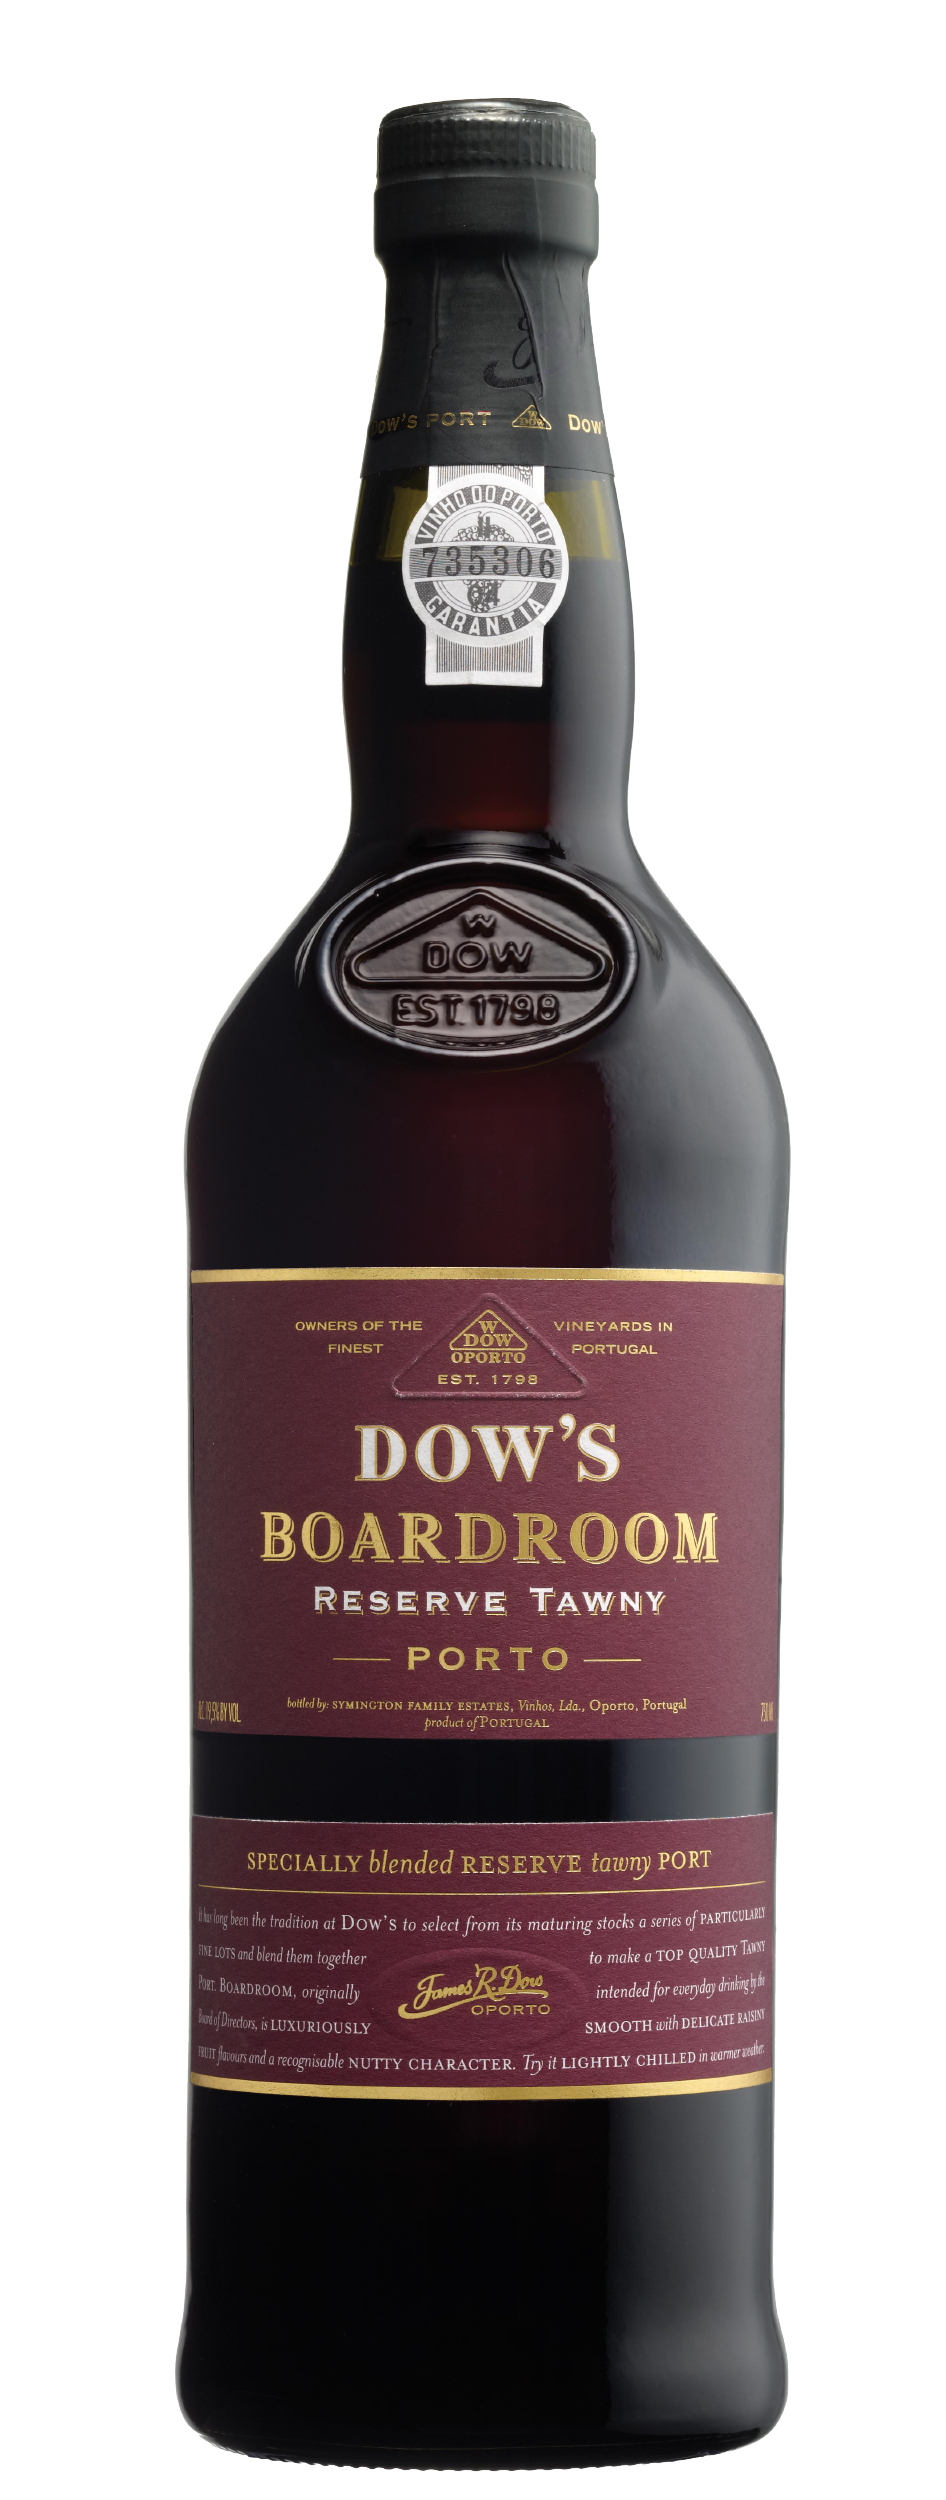 Product Image for DOW'S BOARDROOM TAWNY PORT